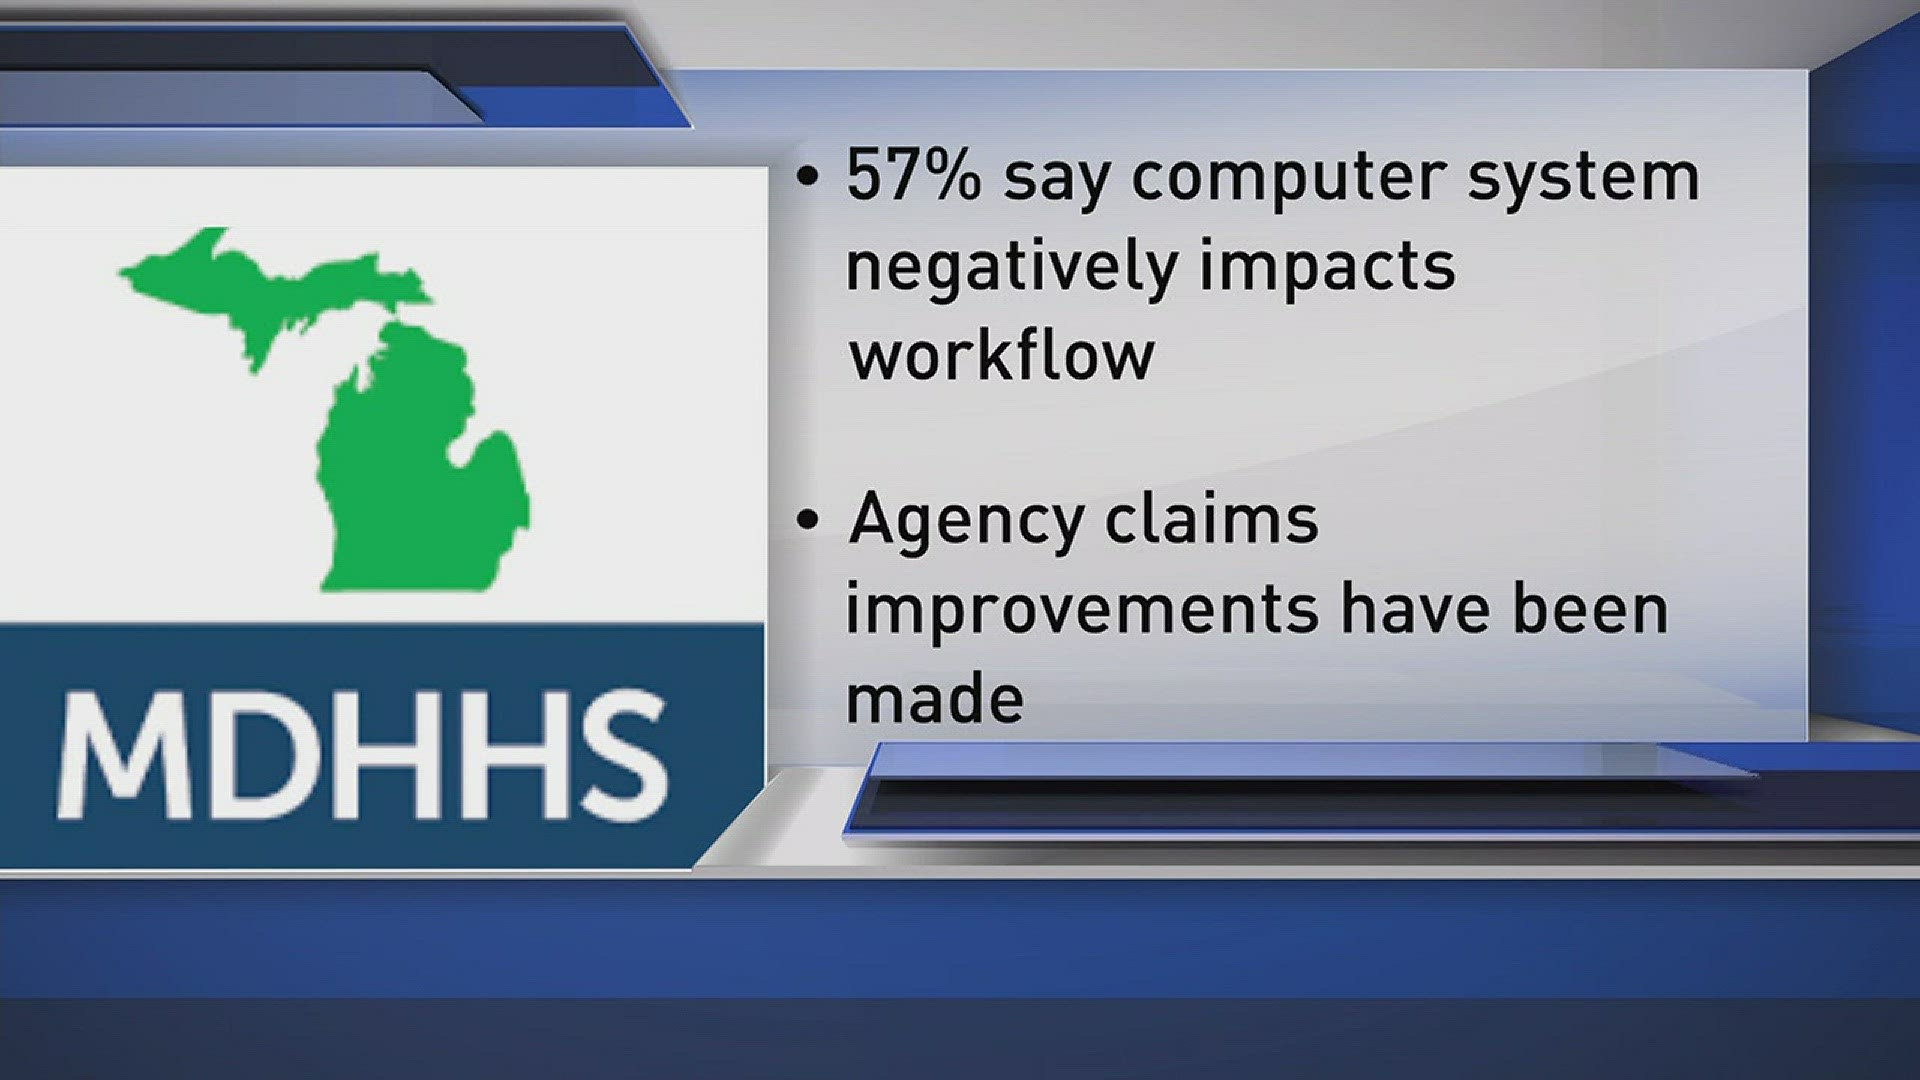 Earlier this year, the 13 Watchdog team investigated the computer problems at the state's unemployment insurance agency.